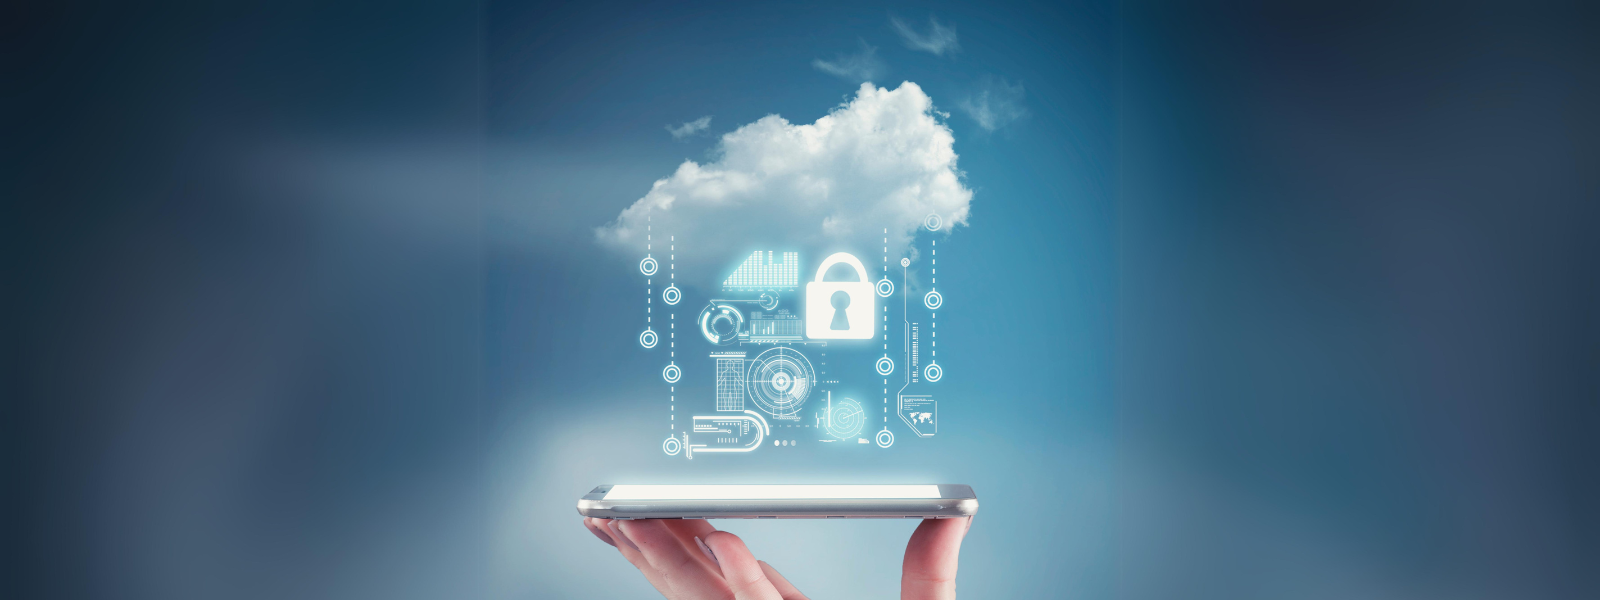 The 7 Biggest Threats to Data in the Cloud